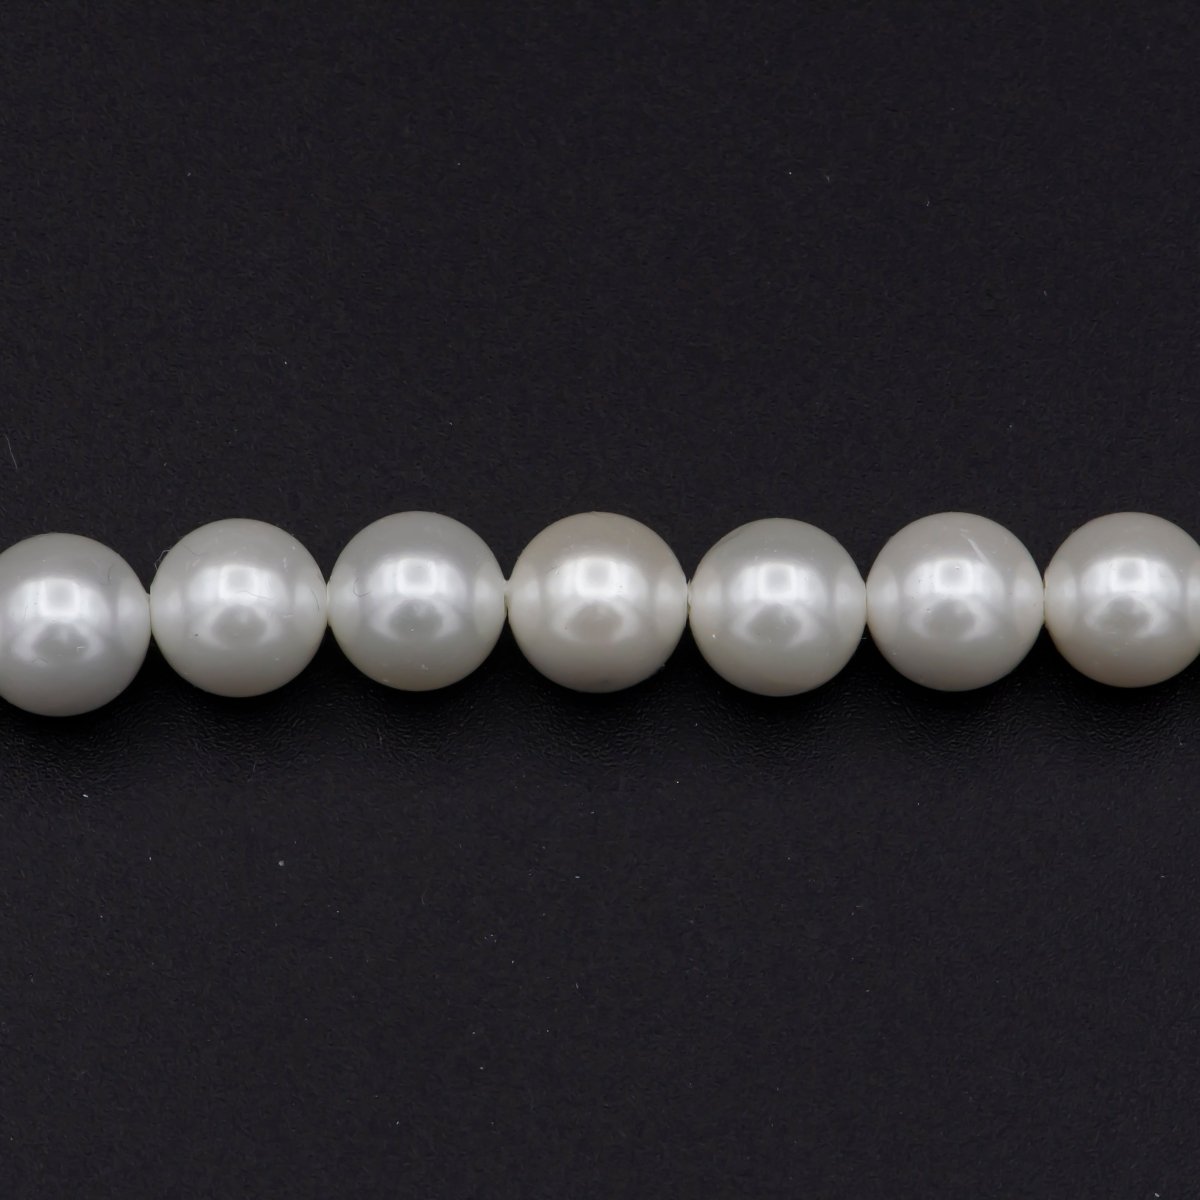 7.9-8.2mm AAA Natural White Semi Round Freshwater Pearls Genuine High Luster Smooth And Round White Freshwater Pearl Beads | WA-575 Clearance Pricing - DLUXCA